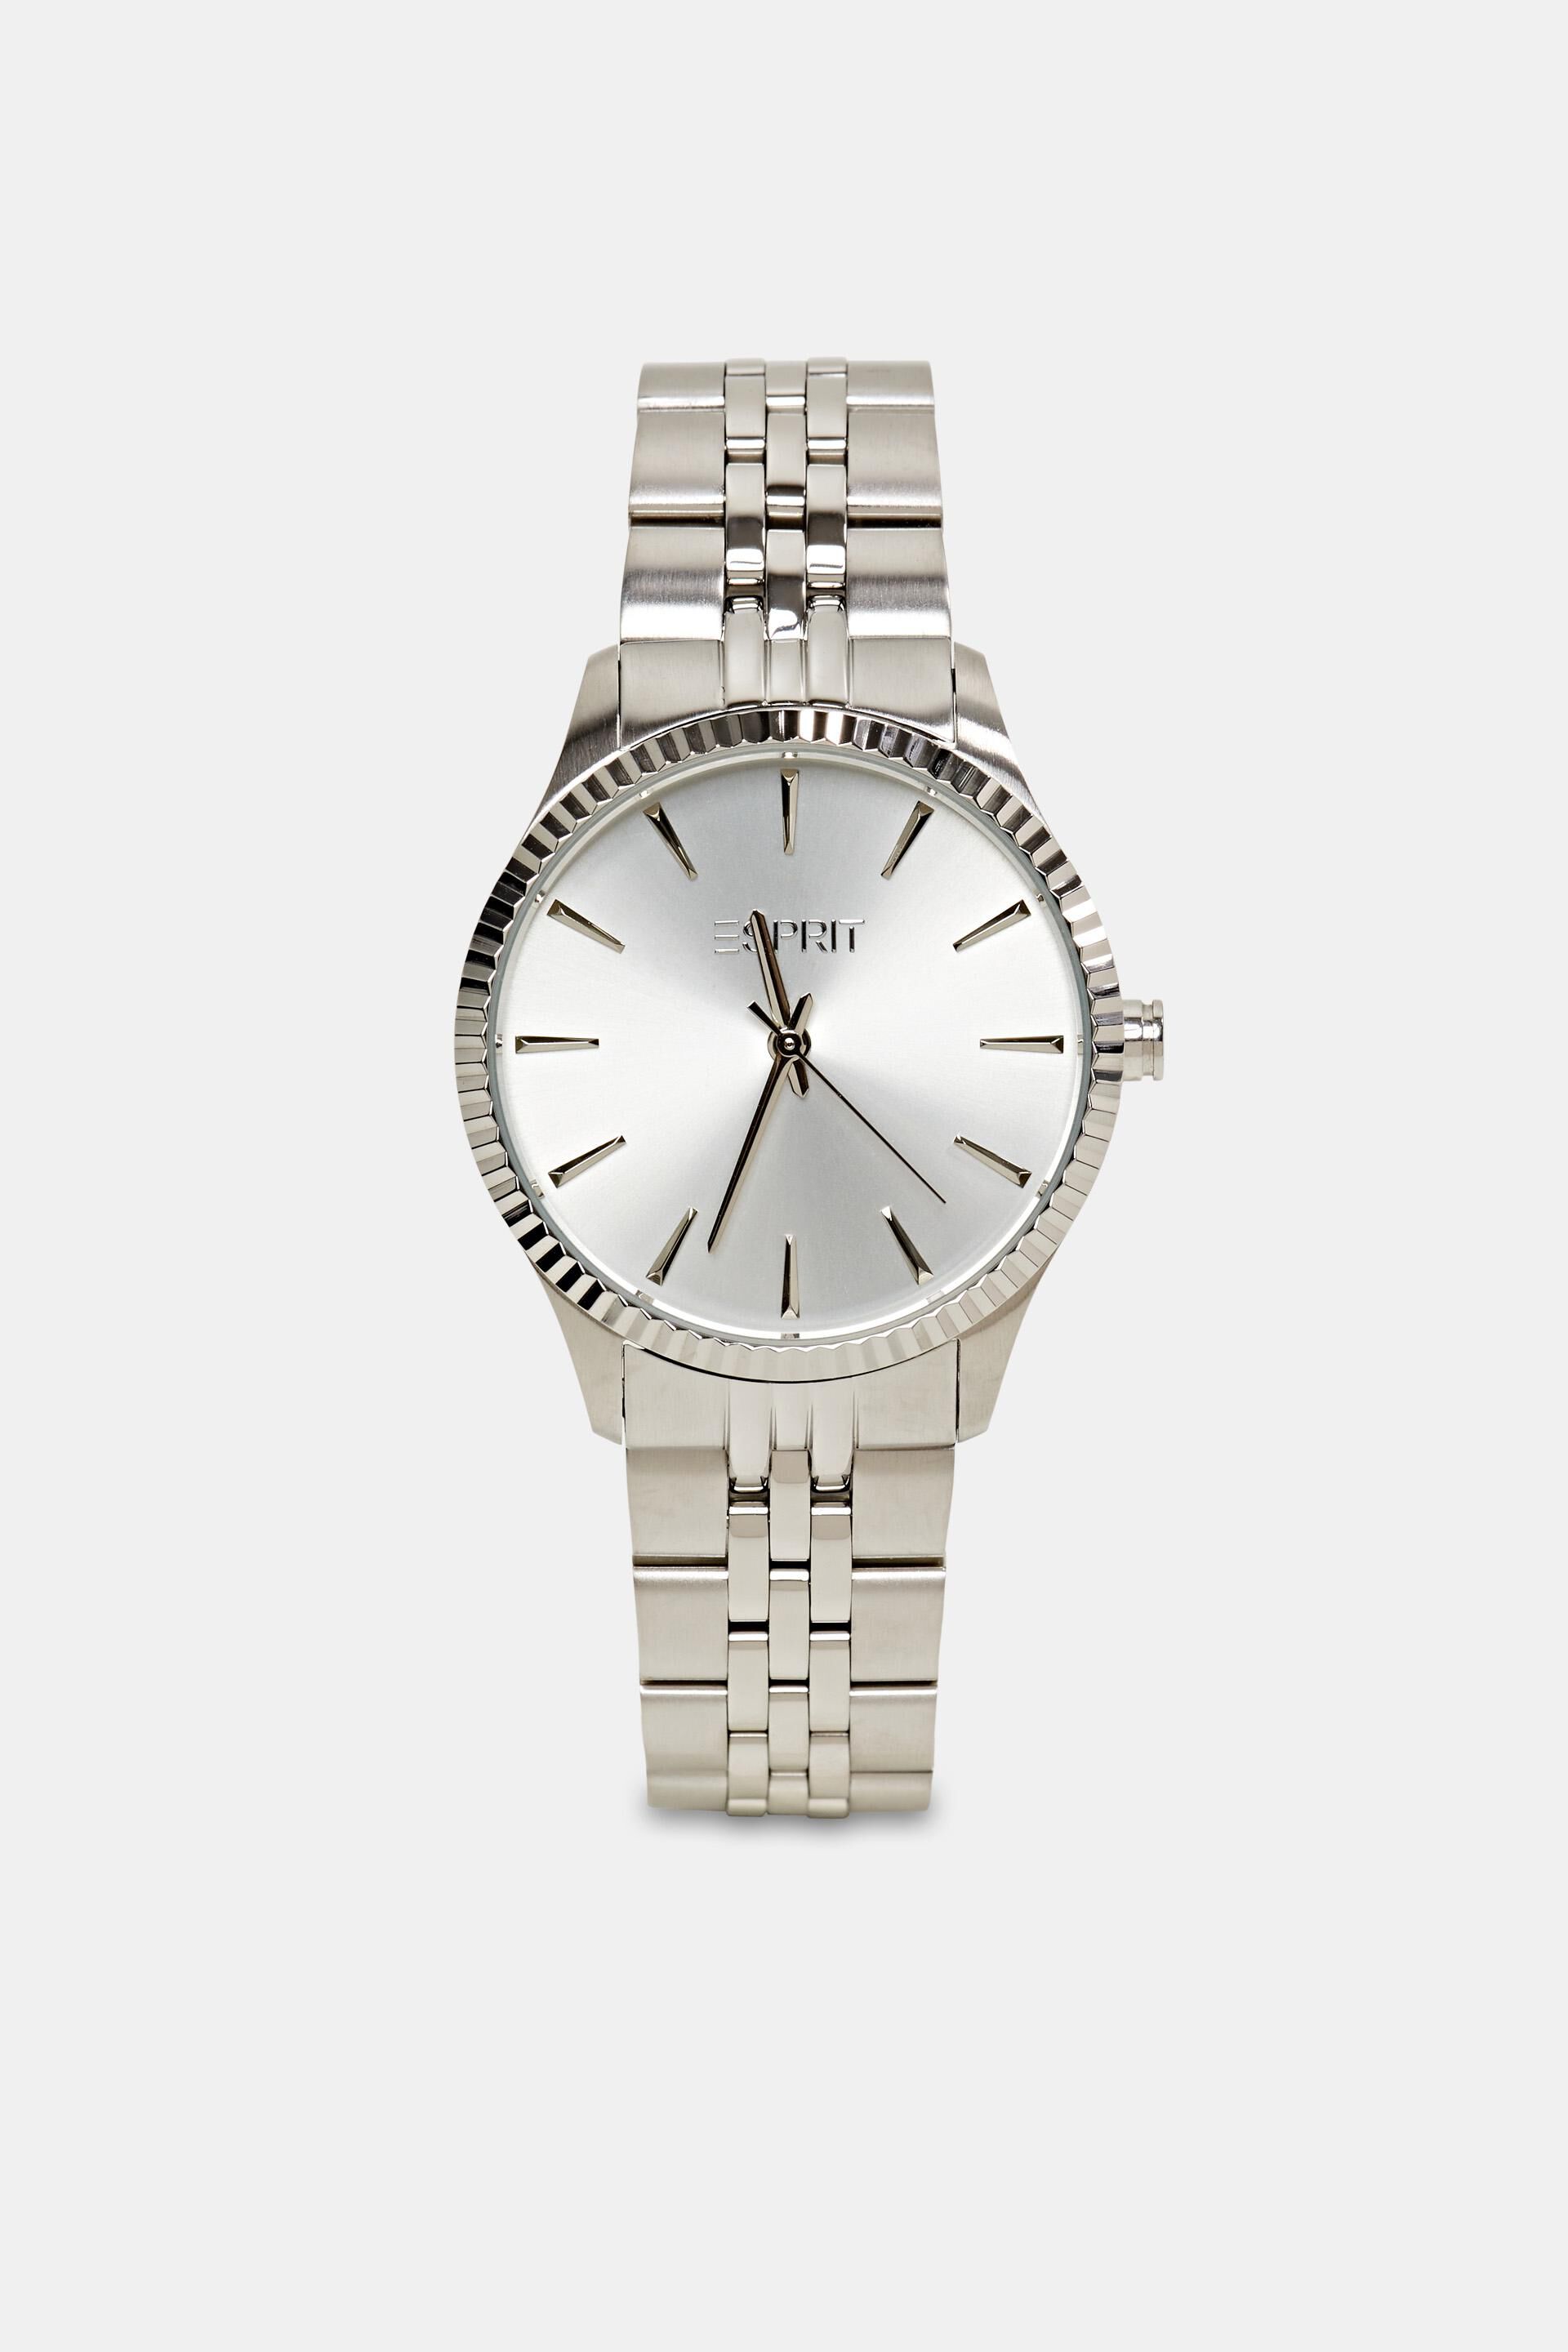 ESPRIT - Stainless steel watch with a corrugated bezel at our online shop